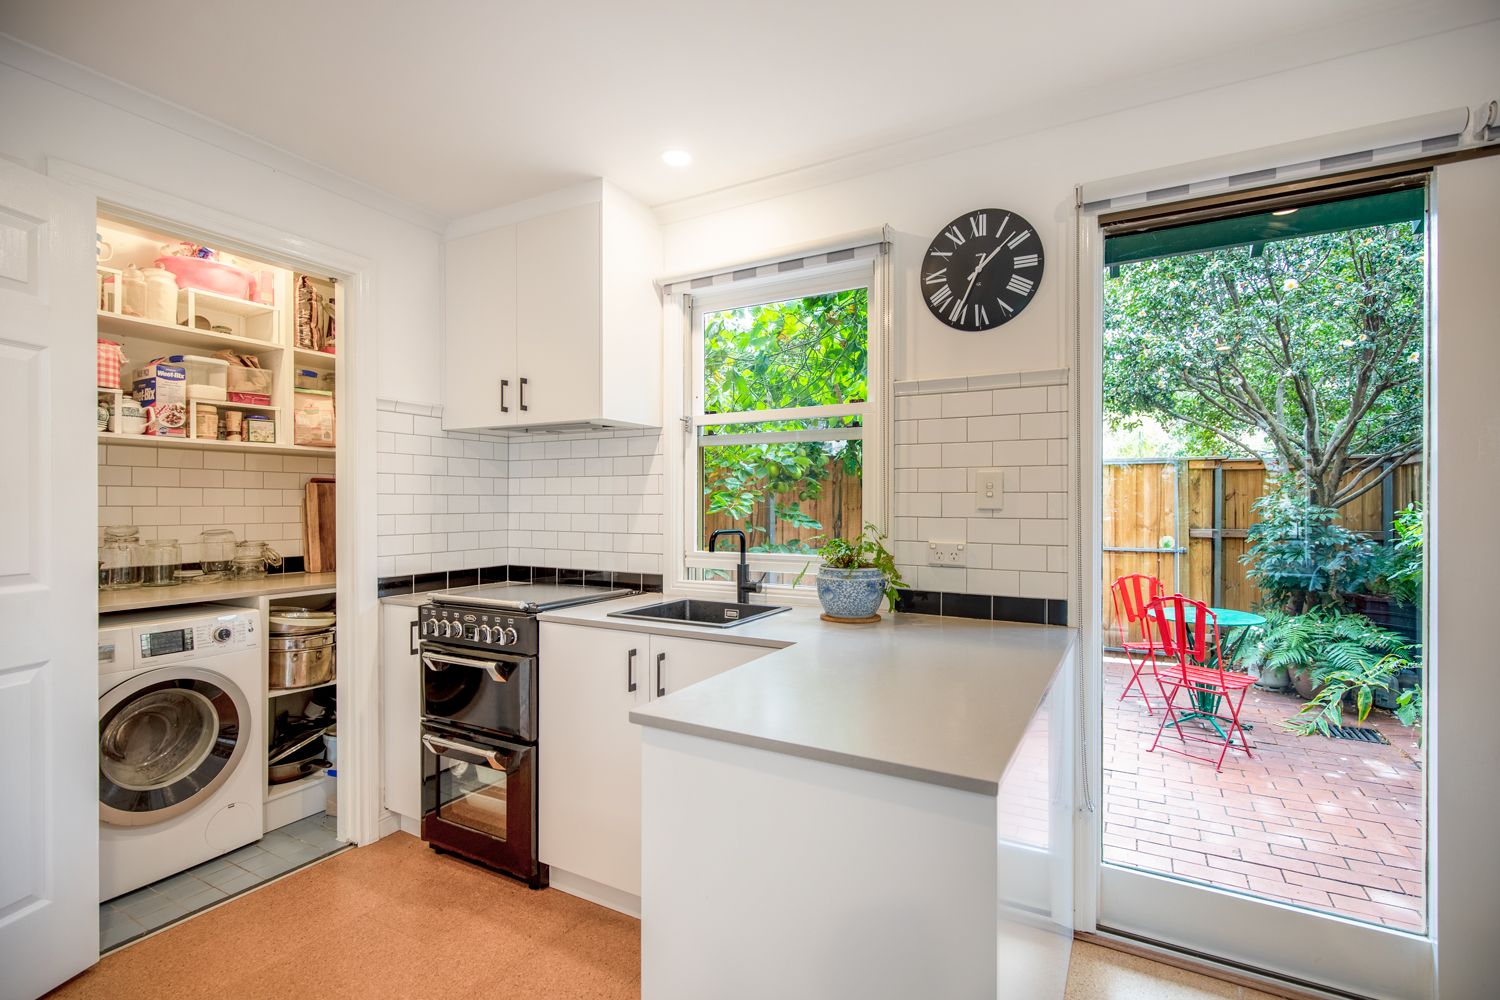 15/3 Booth St, Annandale NSW 2038, Image 2